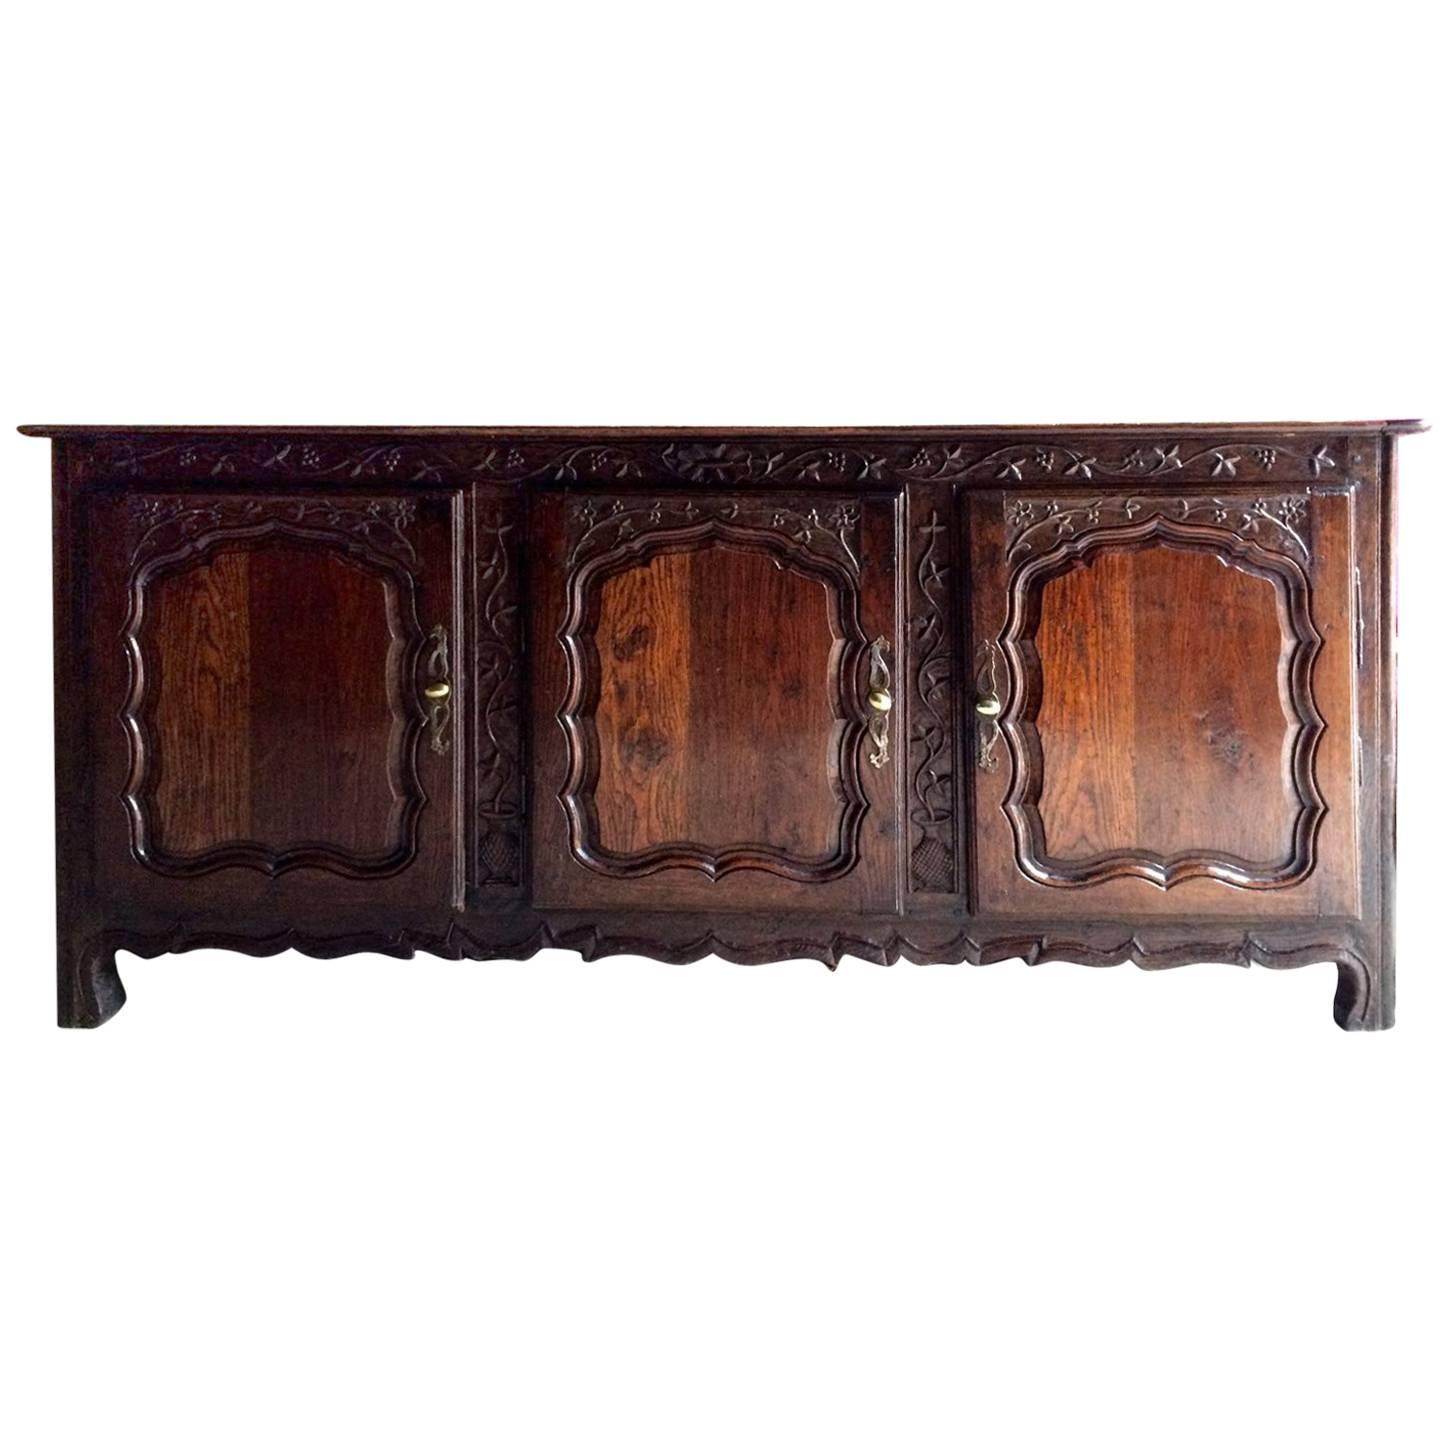 Louis XV Sideboard Dresser Credenza Antique French, 18th Century, 1750